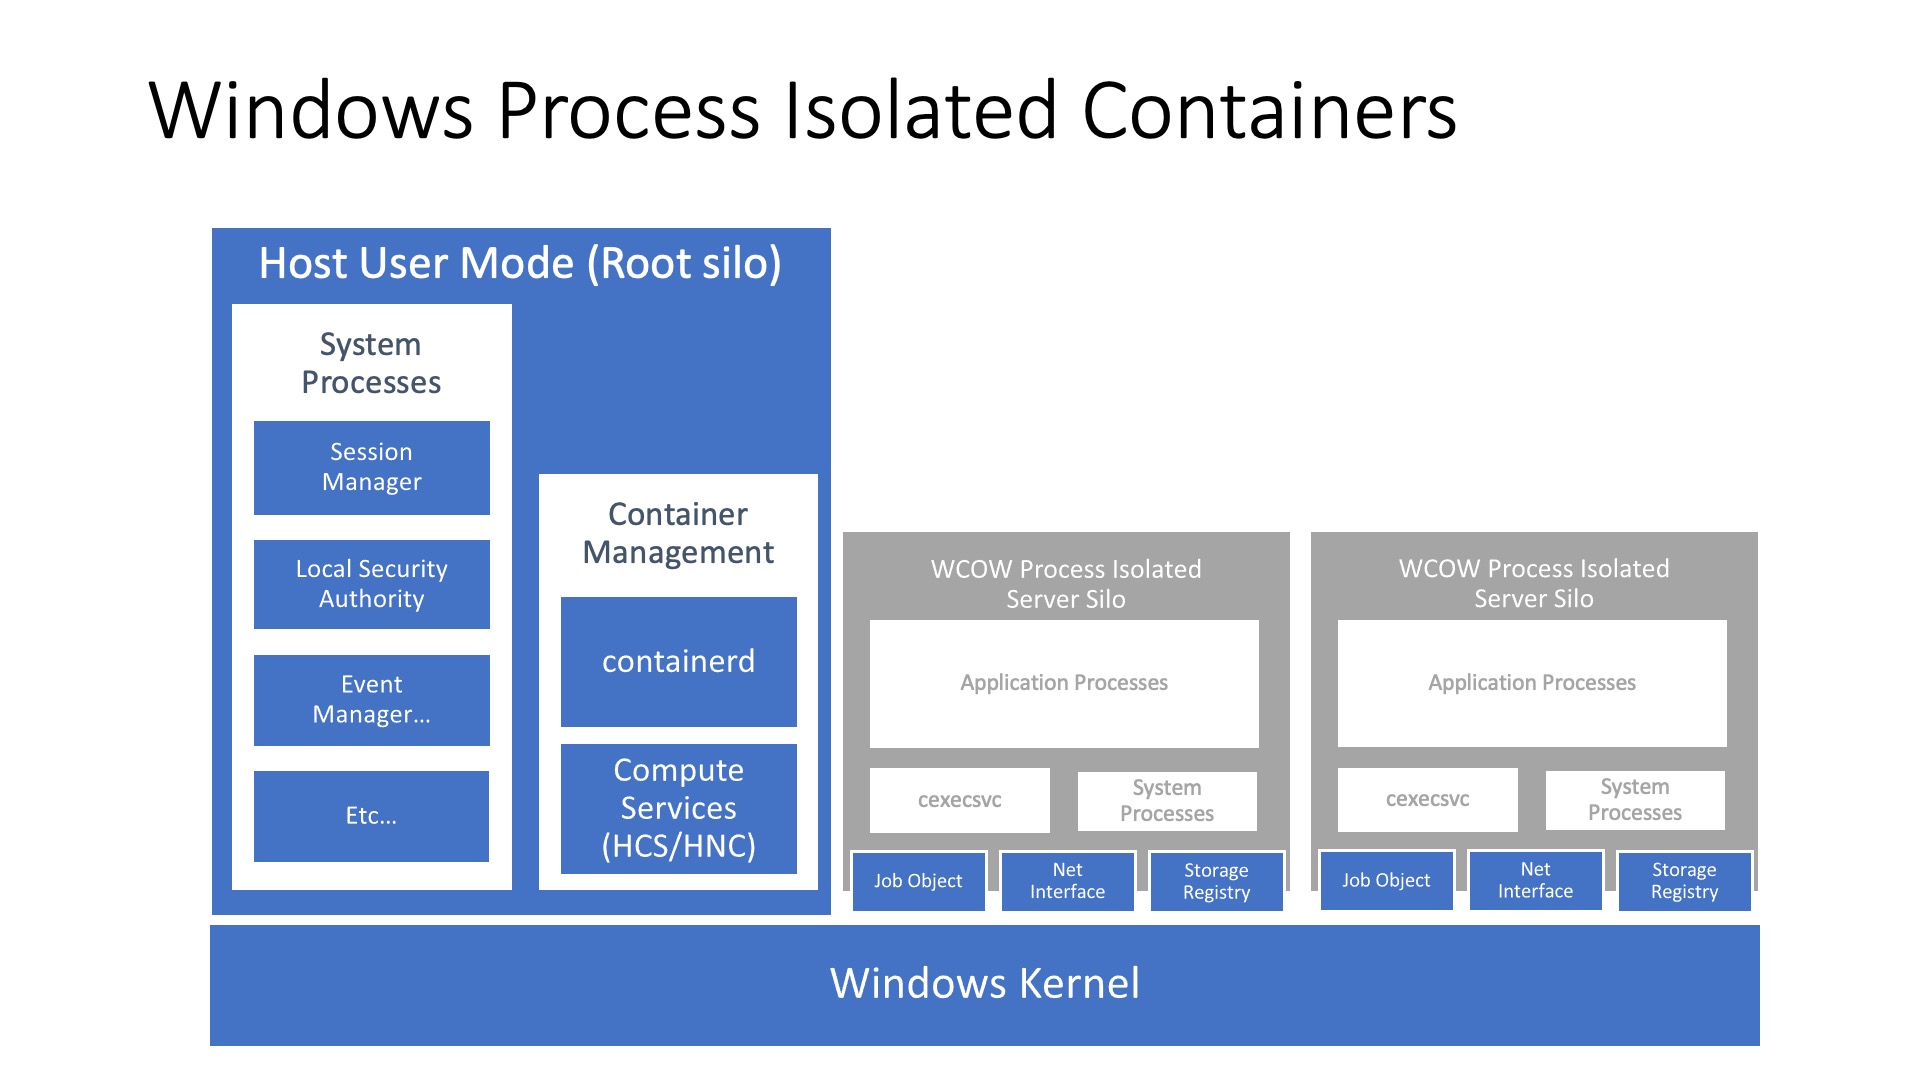 Architecture of a container running in process isolation mode. The process runs against the same kernel as the host but has an isolated view on system resources and thus isolating it from the rest of the system.